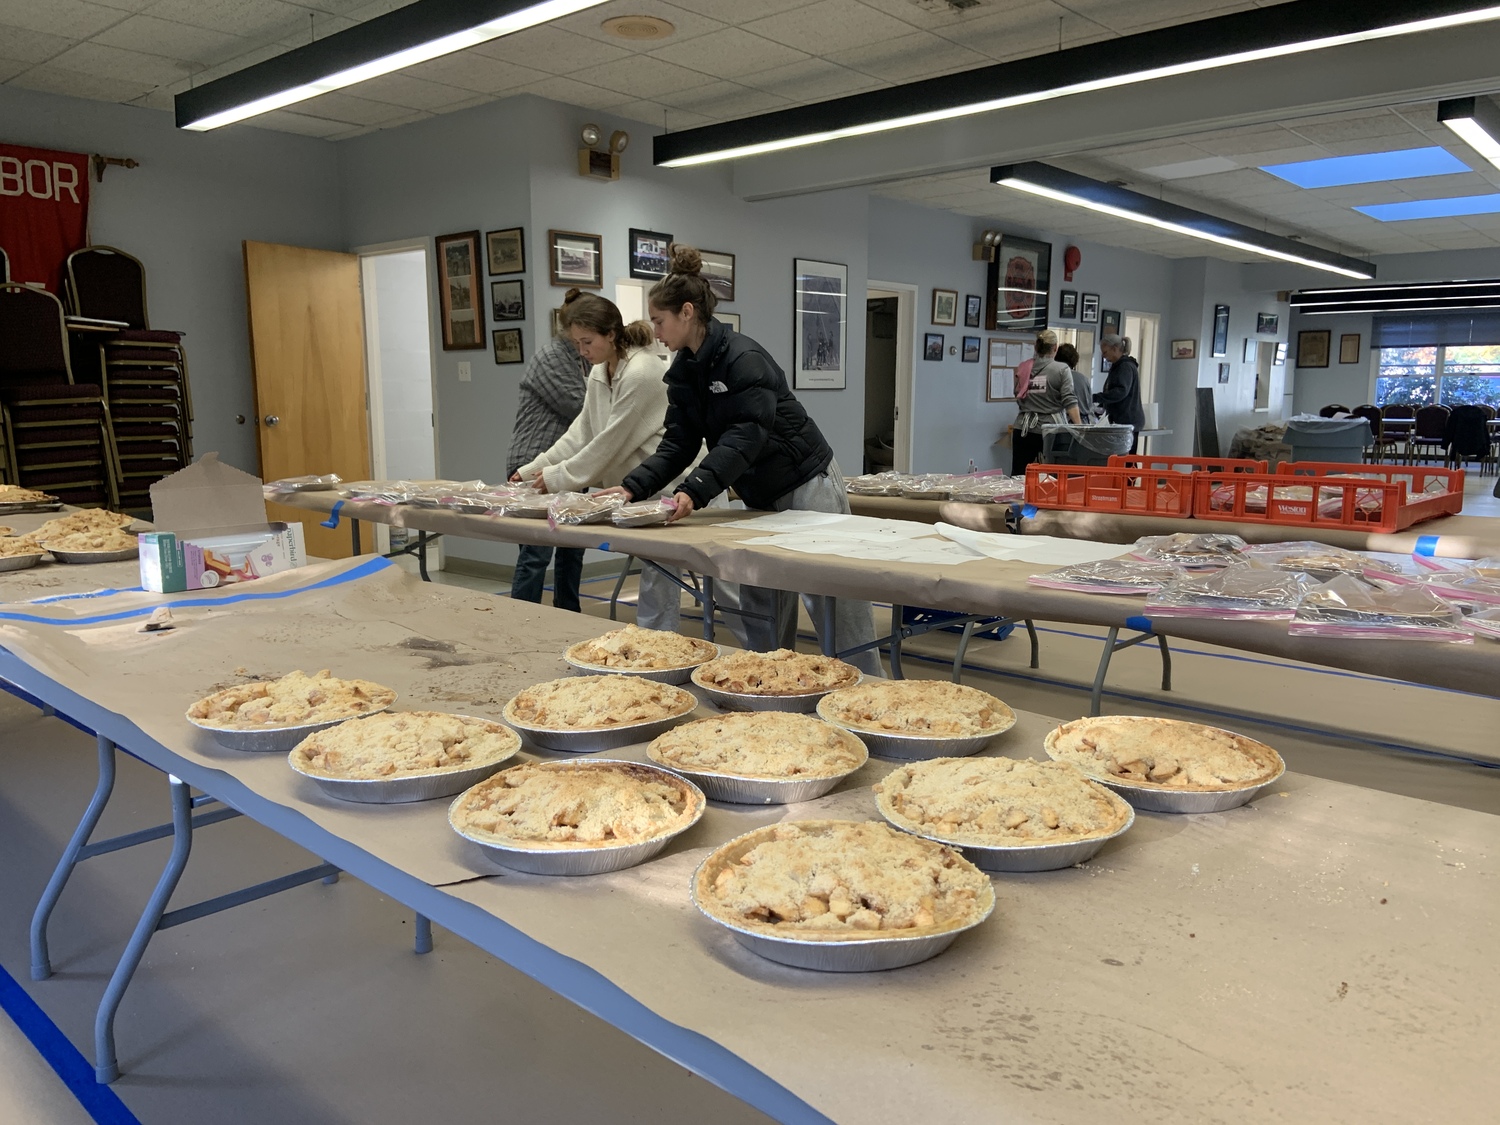 Volunteers lay out pies to cool after a marathon baking session on Saturday. STEPHEN J. KOTZ